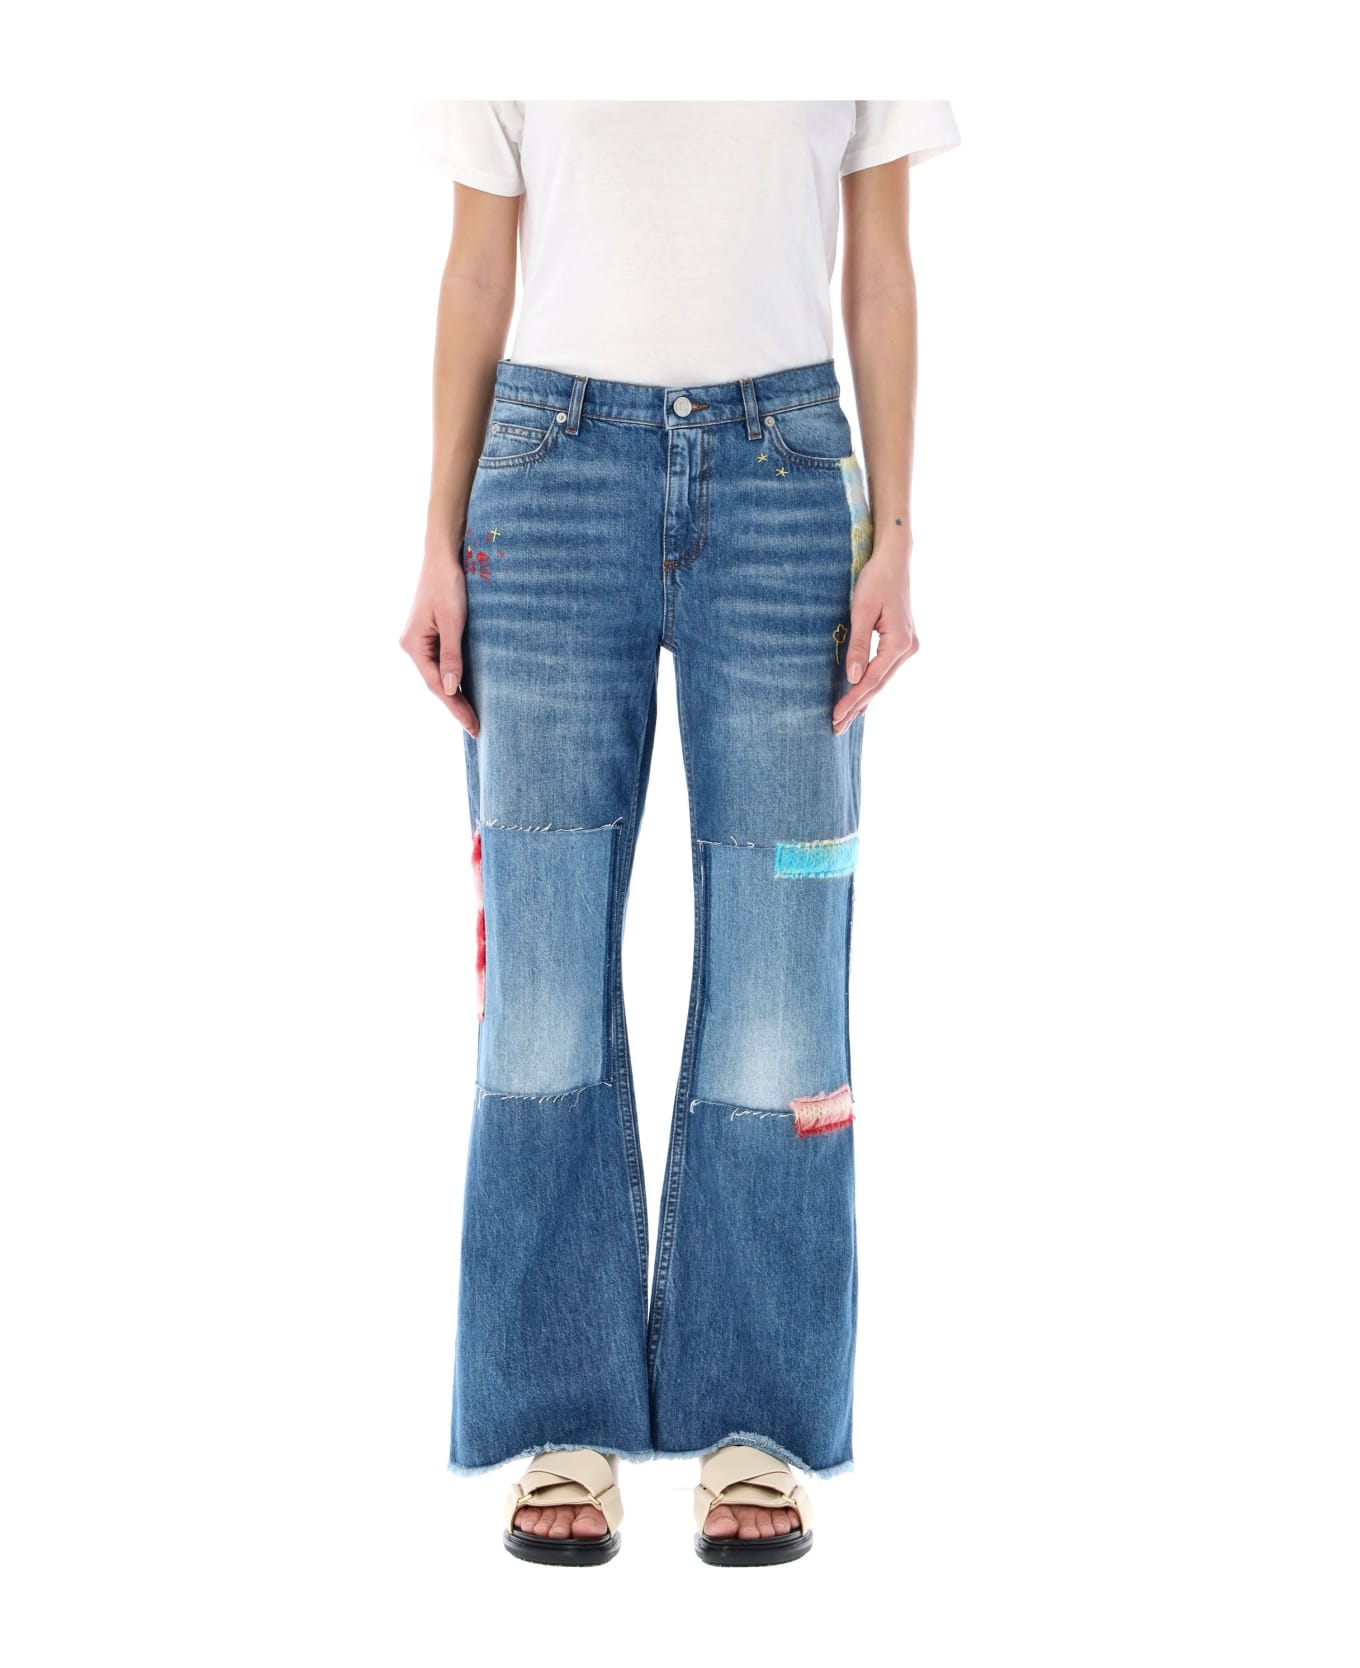 Marni Mohair Patches Jeans - BLUE MIX